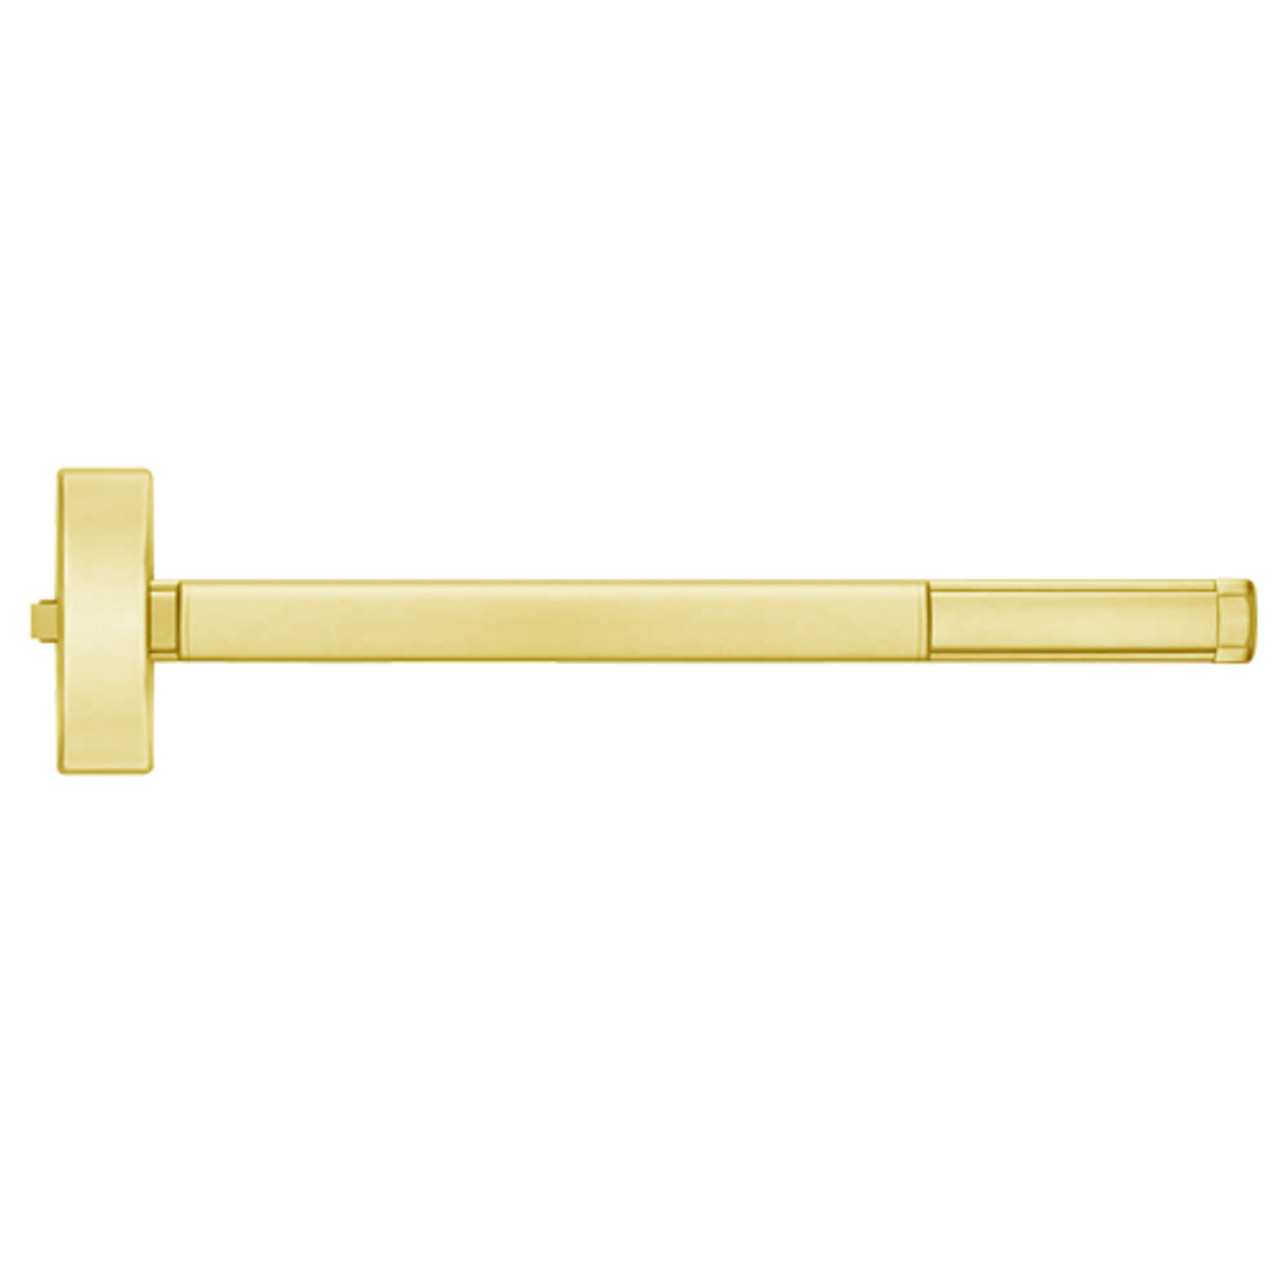 TSFL2115-605-48 PHI 2100 Series Fire Rated Apex Rim Exit Device with Touchbar Monitoring Switch Prepped for Thumb Piece Always Active in Bright Brass Finish